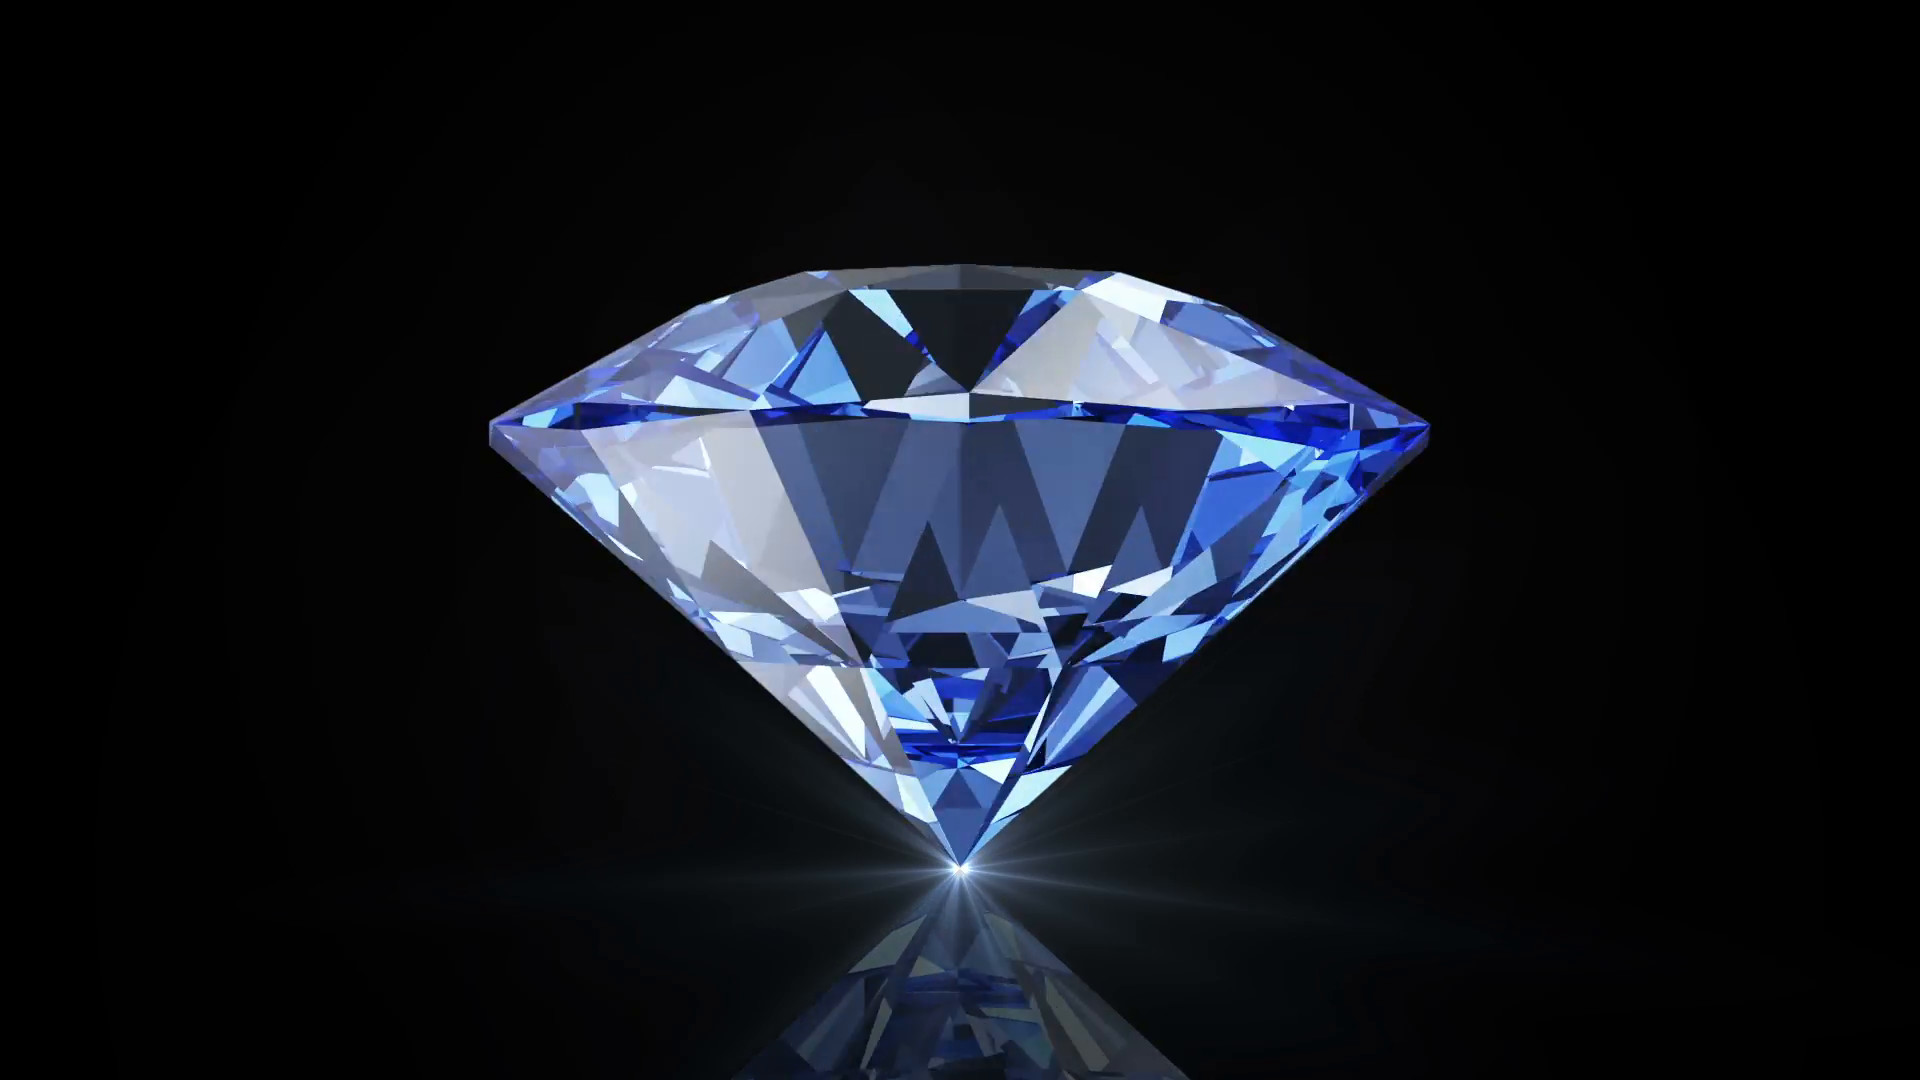 1920x1080 Animation of Blue Diamond Rotation on black background with glowing rays.  Seamless Looping HQ Video